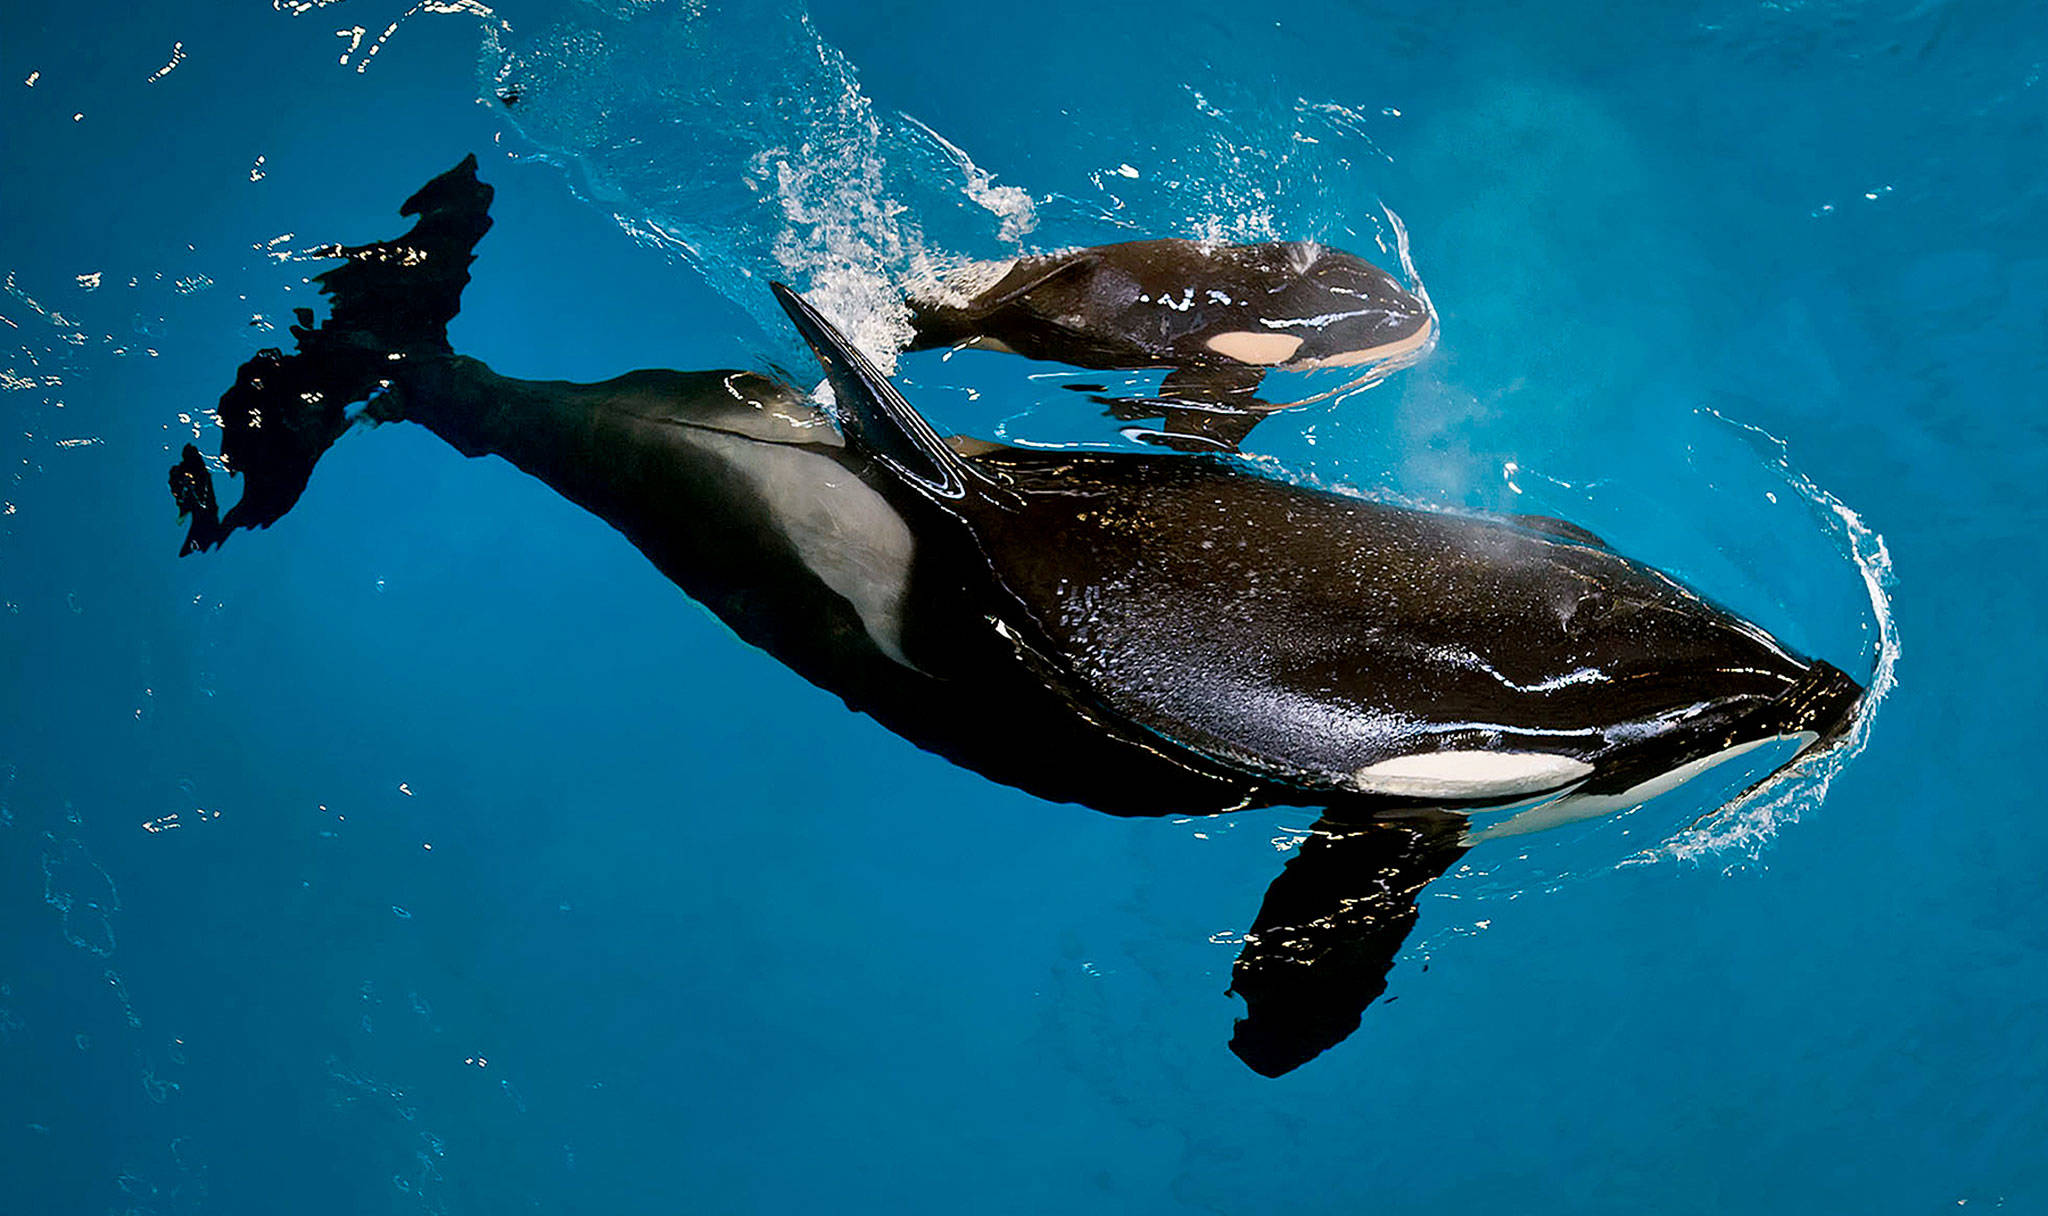 Orca Takara helps guide her newborn to the water’s surface at SeaWorld San Antonio on Wednesday. (Chris Gotshall/SeaWorld Parks & Entertainment via AP)